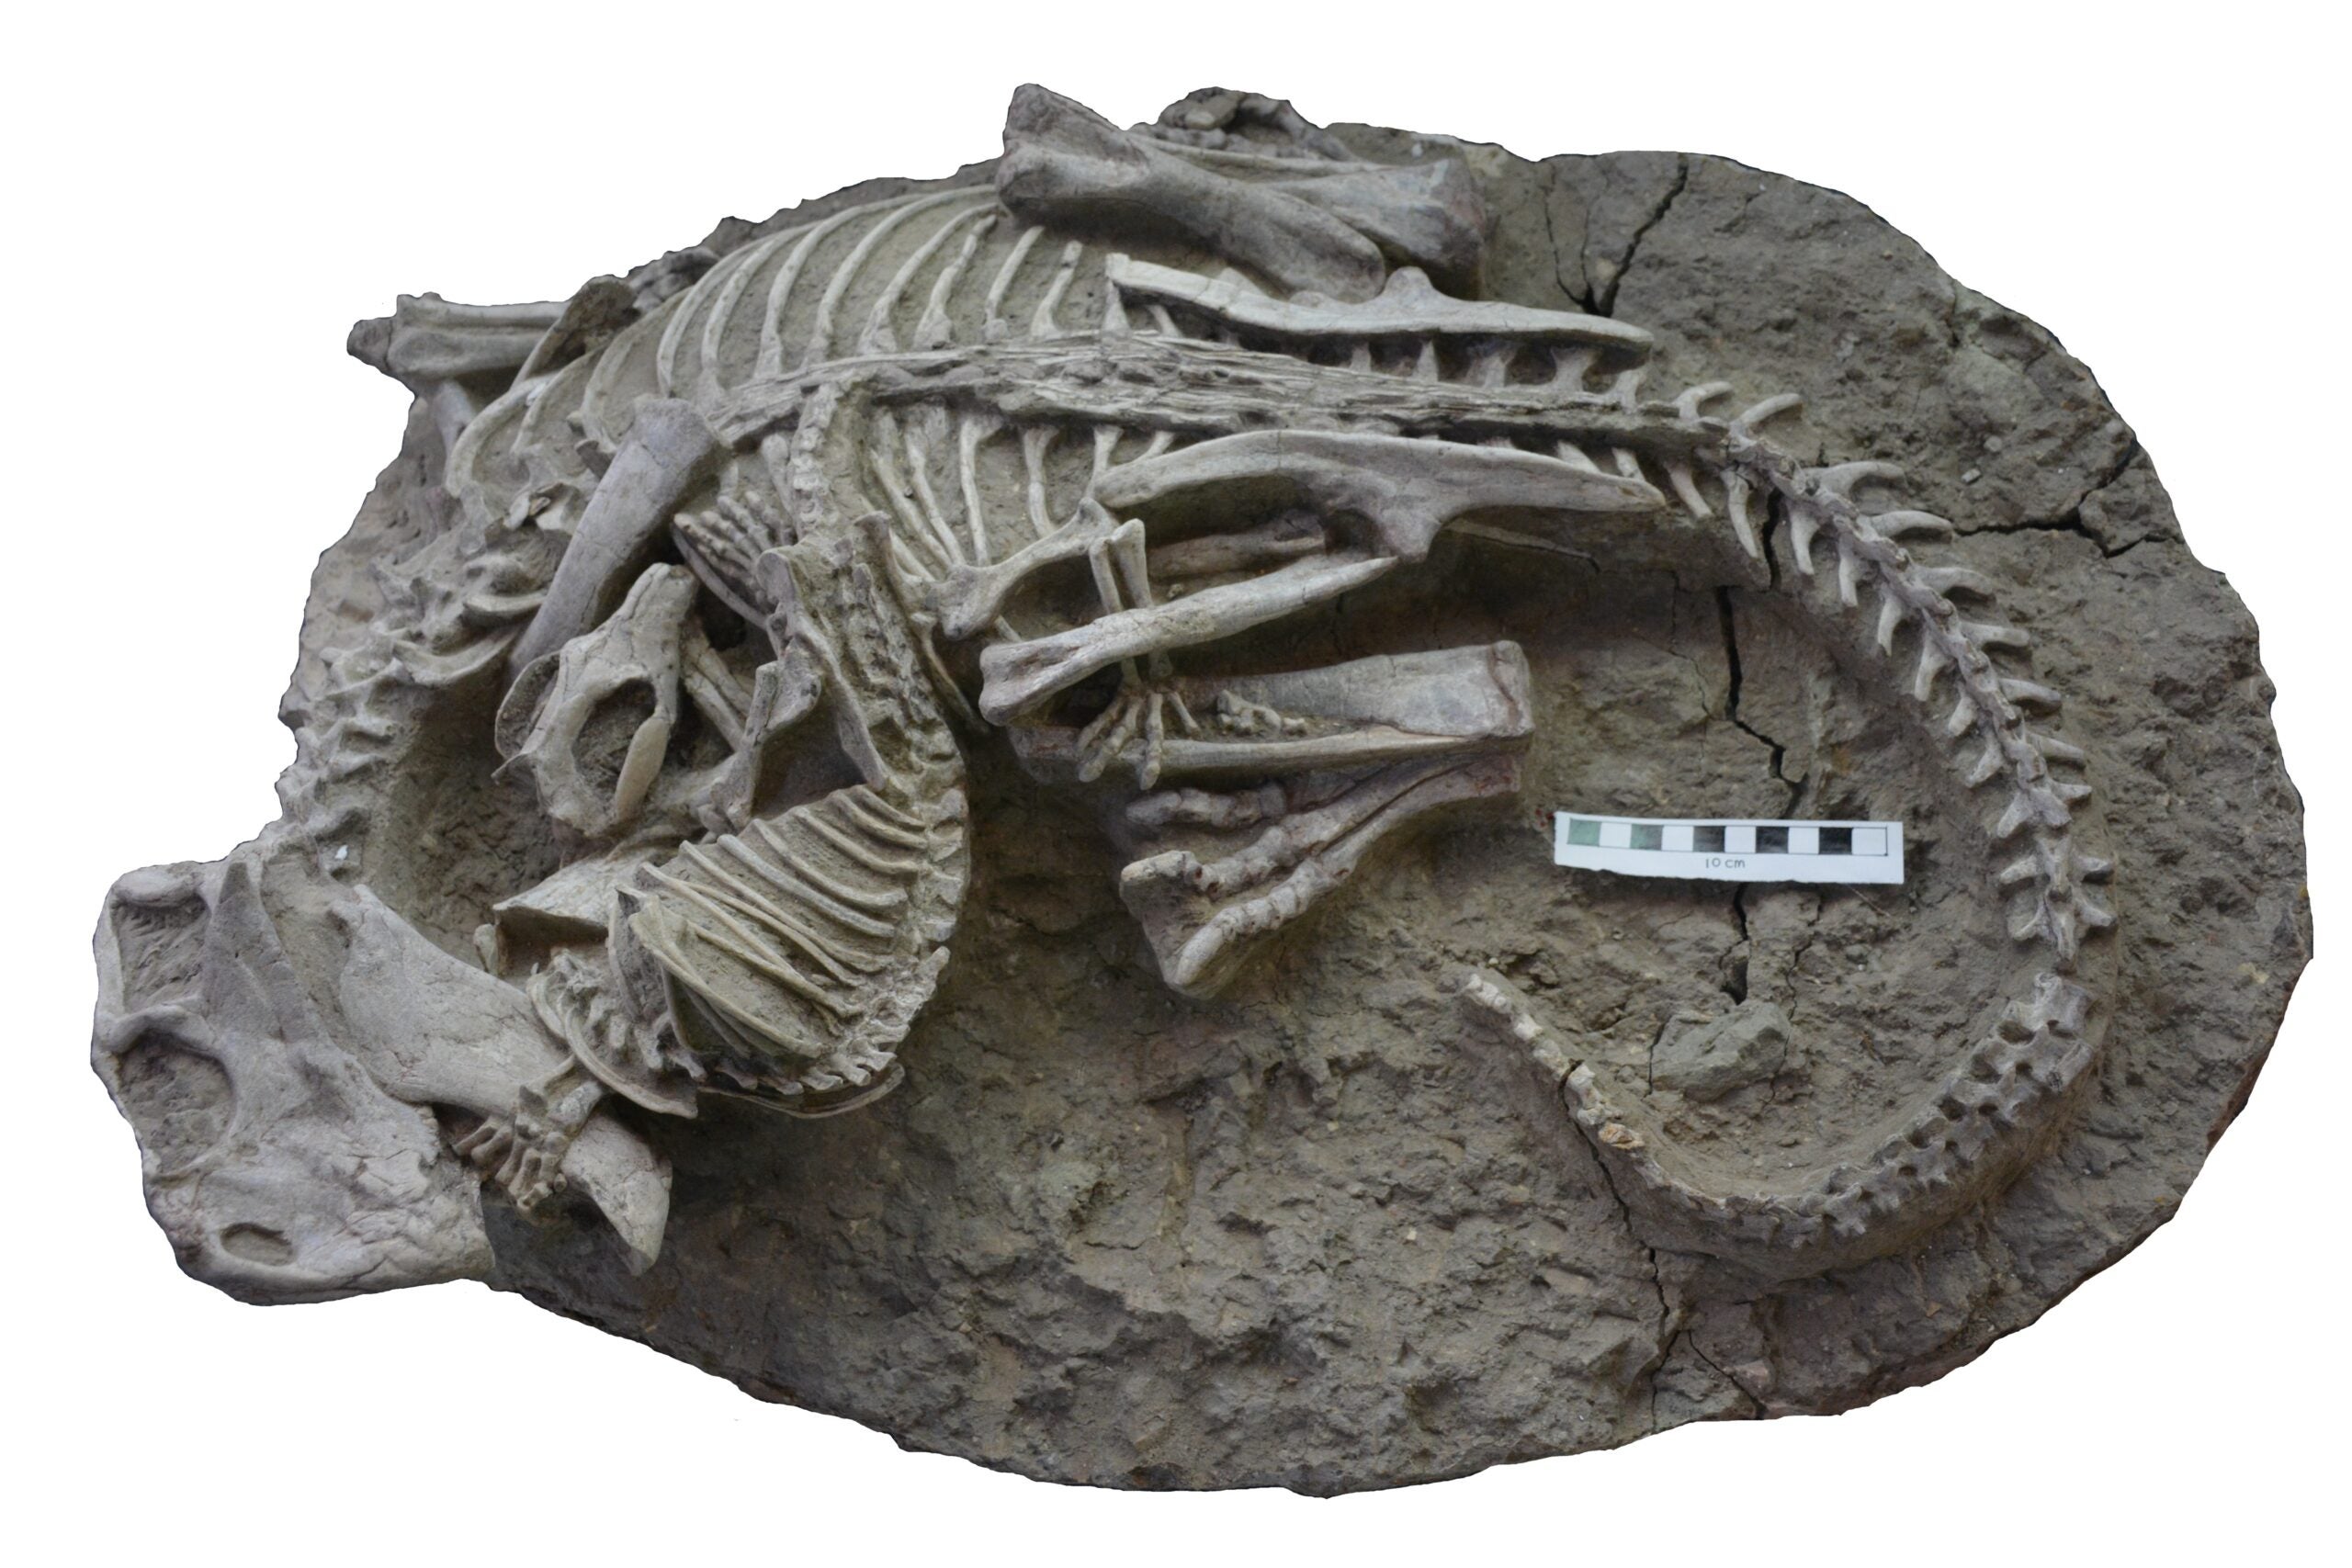 Fossil showing the entangled skeletons of Psittacosaurus (dinosaur) and Repenomamus (mammal) and their interaction just before death. The scale bar equals 10 centimeters (3.9 inches).